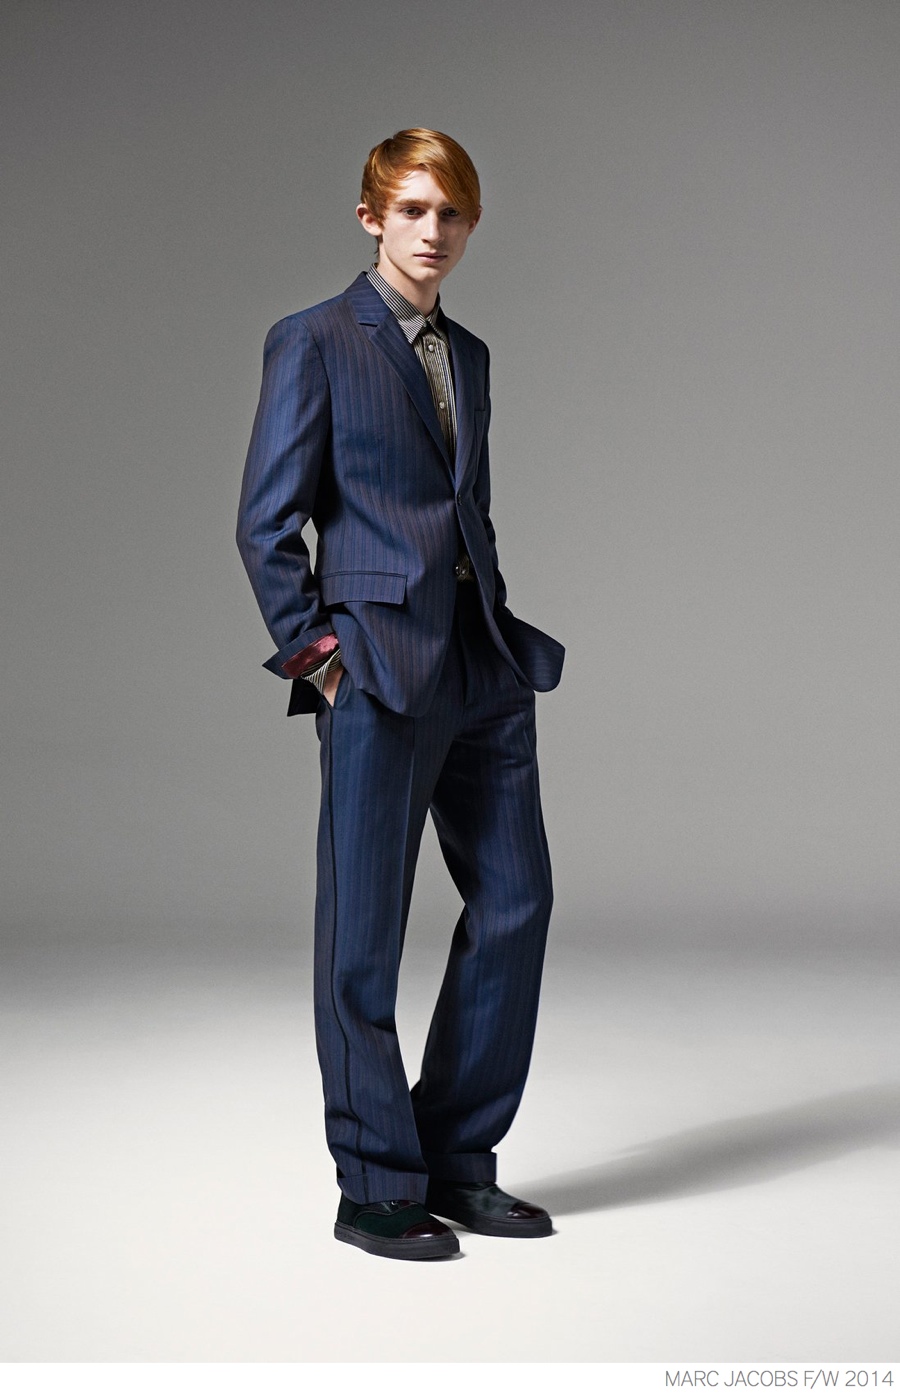 Marc Jacobs Unveils Modern Suiting for Fall/Winter 2014